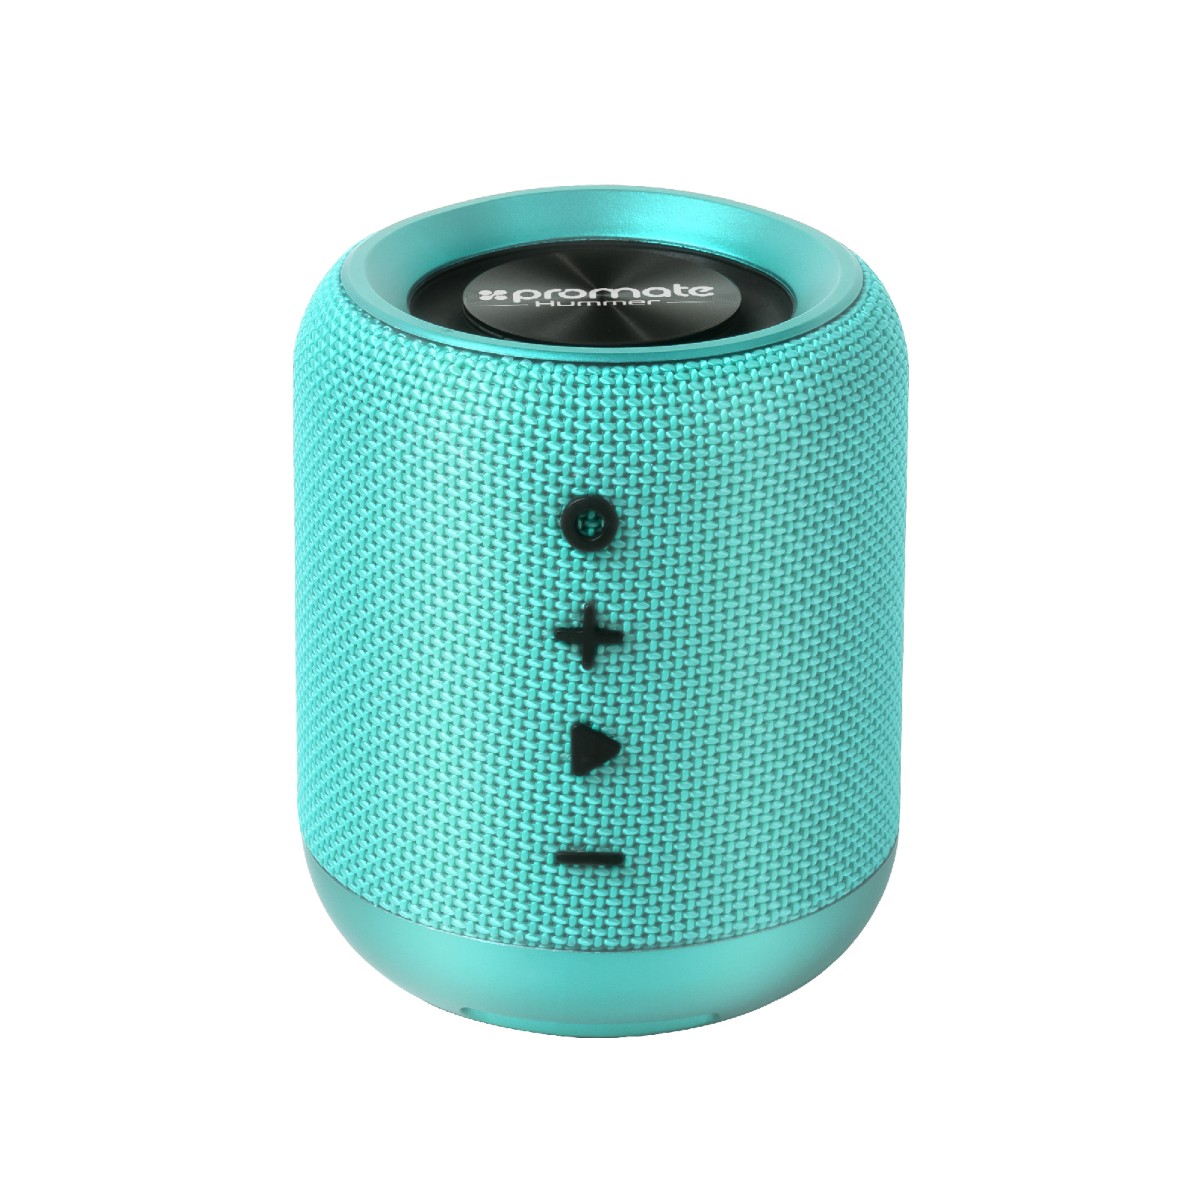 Apple Ipod Touch Wireless Bluetooth Speaker 10w Powerful Bluetooth V4 2 Lightweight Speaker With Hd Audio Handsfree Calling Micro Sd Card Slot 3 5mm Aux In And Fm Radio Promate Hummer Turquoise Buy Online